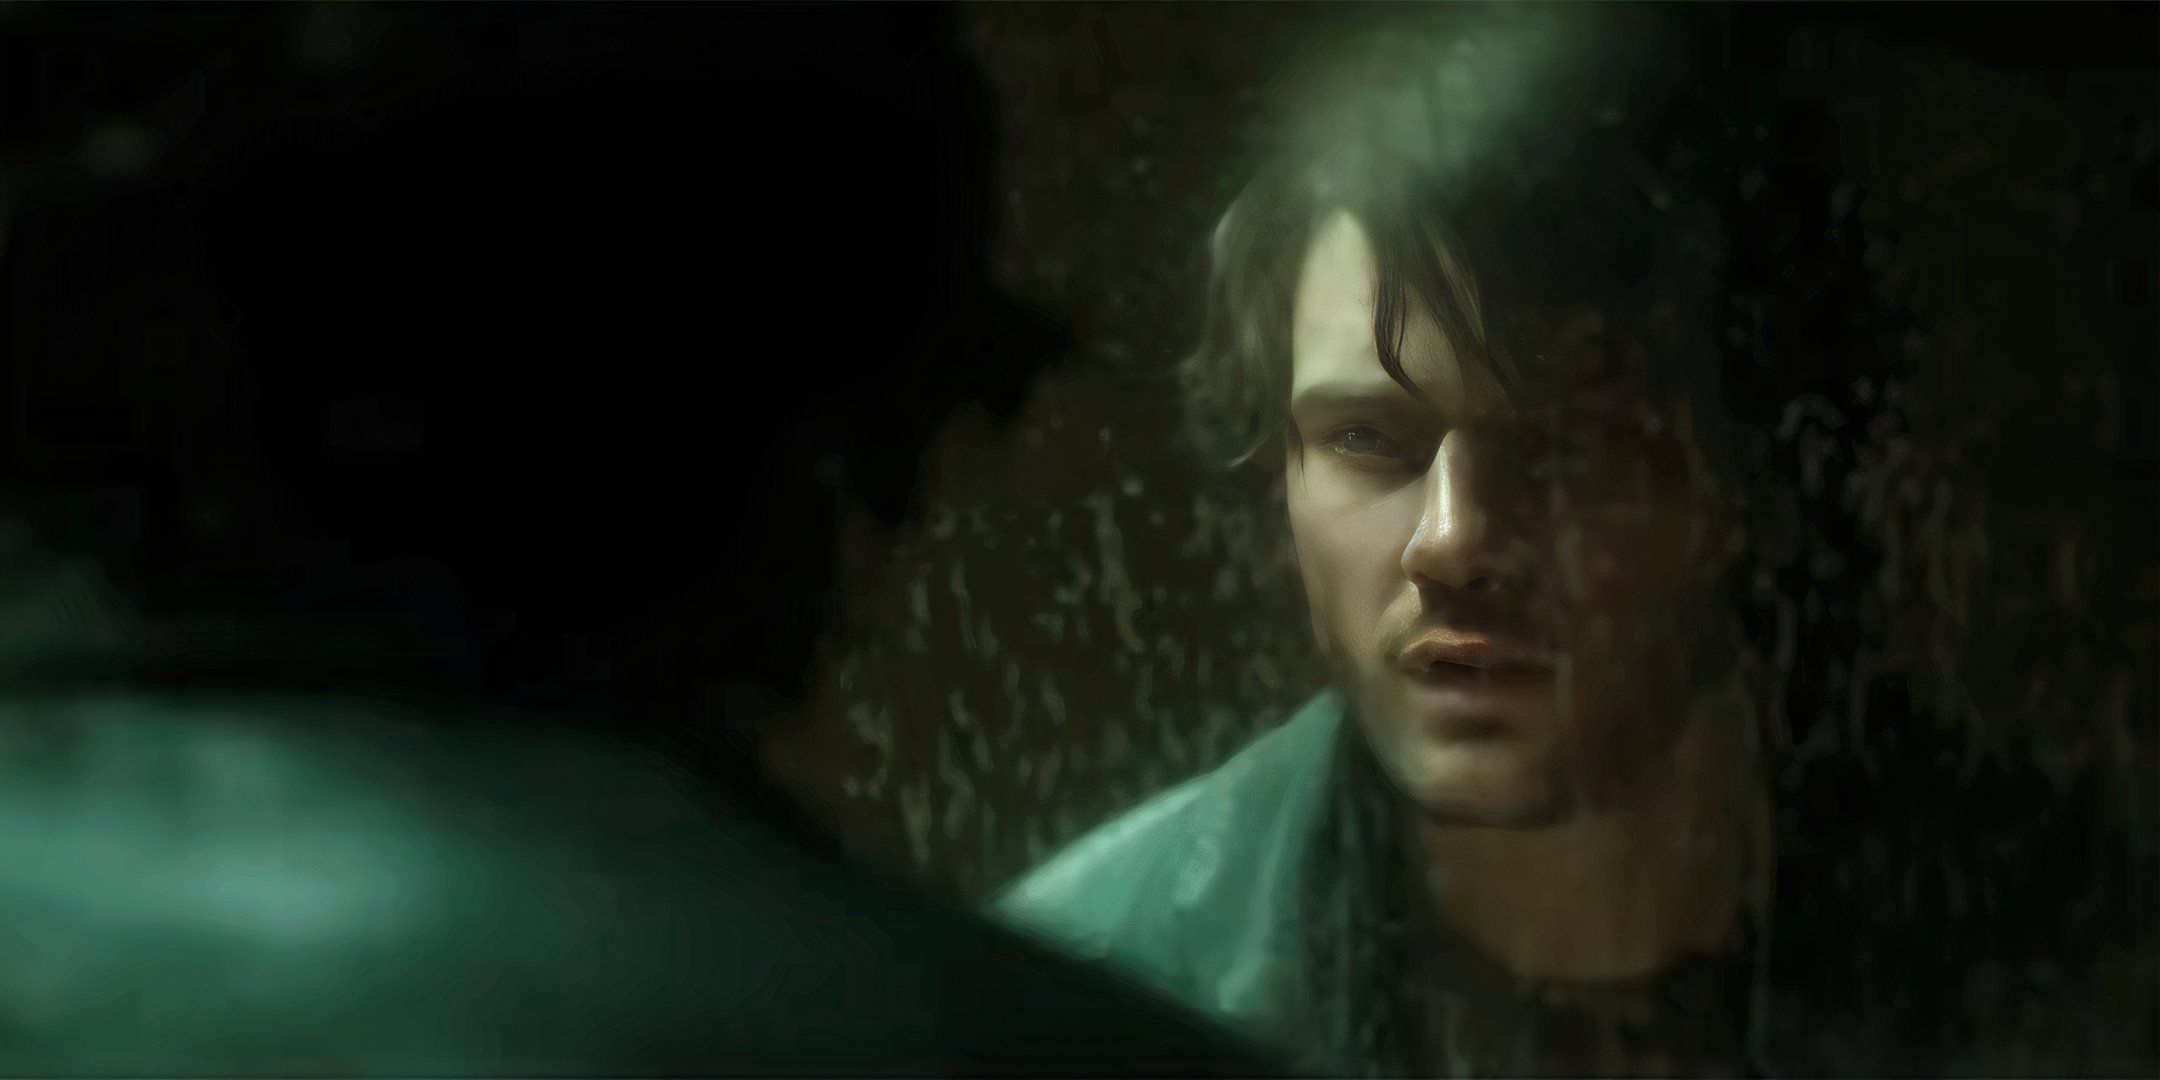 Return to Silent Hill Trailer Offers Chilling Glimpse into the Horror Franchise&#8217;s Latest Film